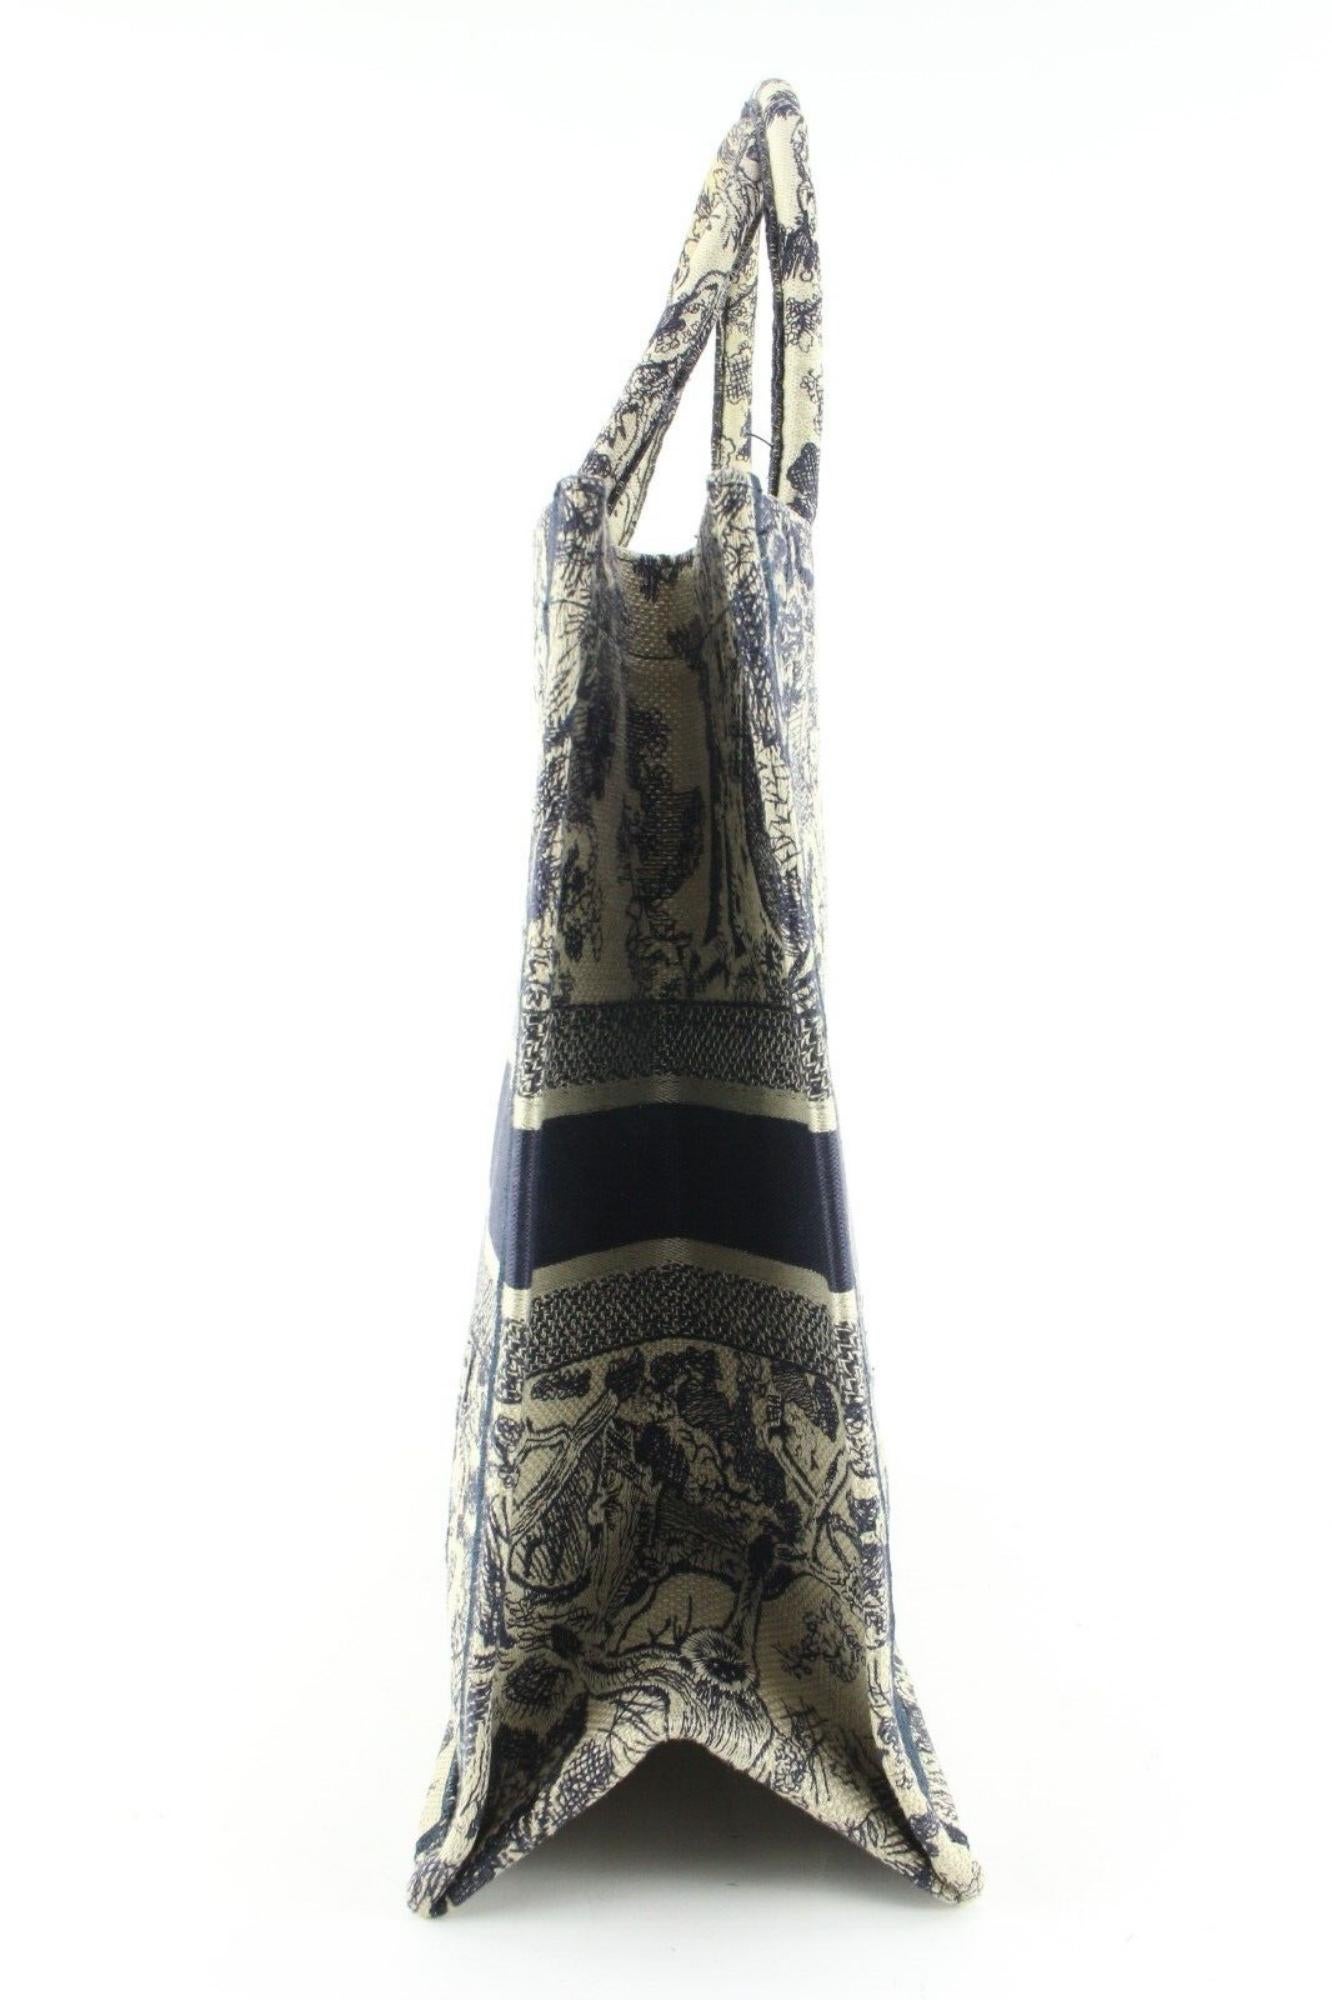 Christian Dior Large Book Tote Embroidered Toile de Jouy Jungle Canvas 1D0413C
Date Code/Serial Number: 50MA1108

Made In: Italy

Measurements: Length:  16.5